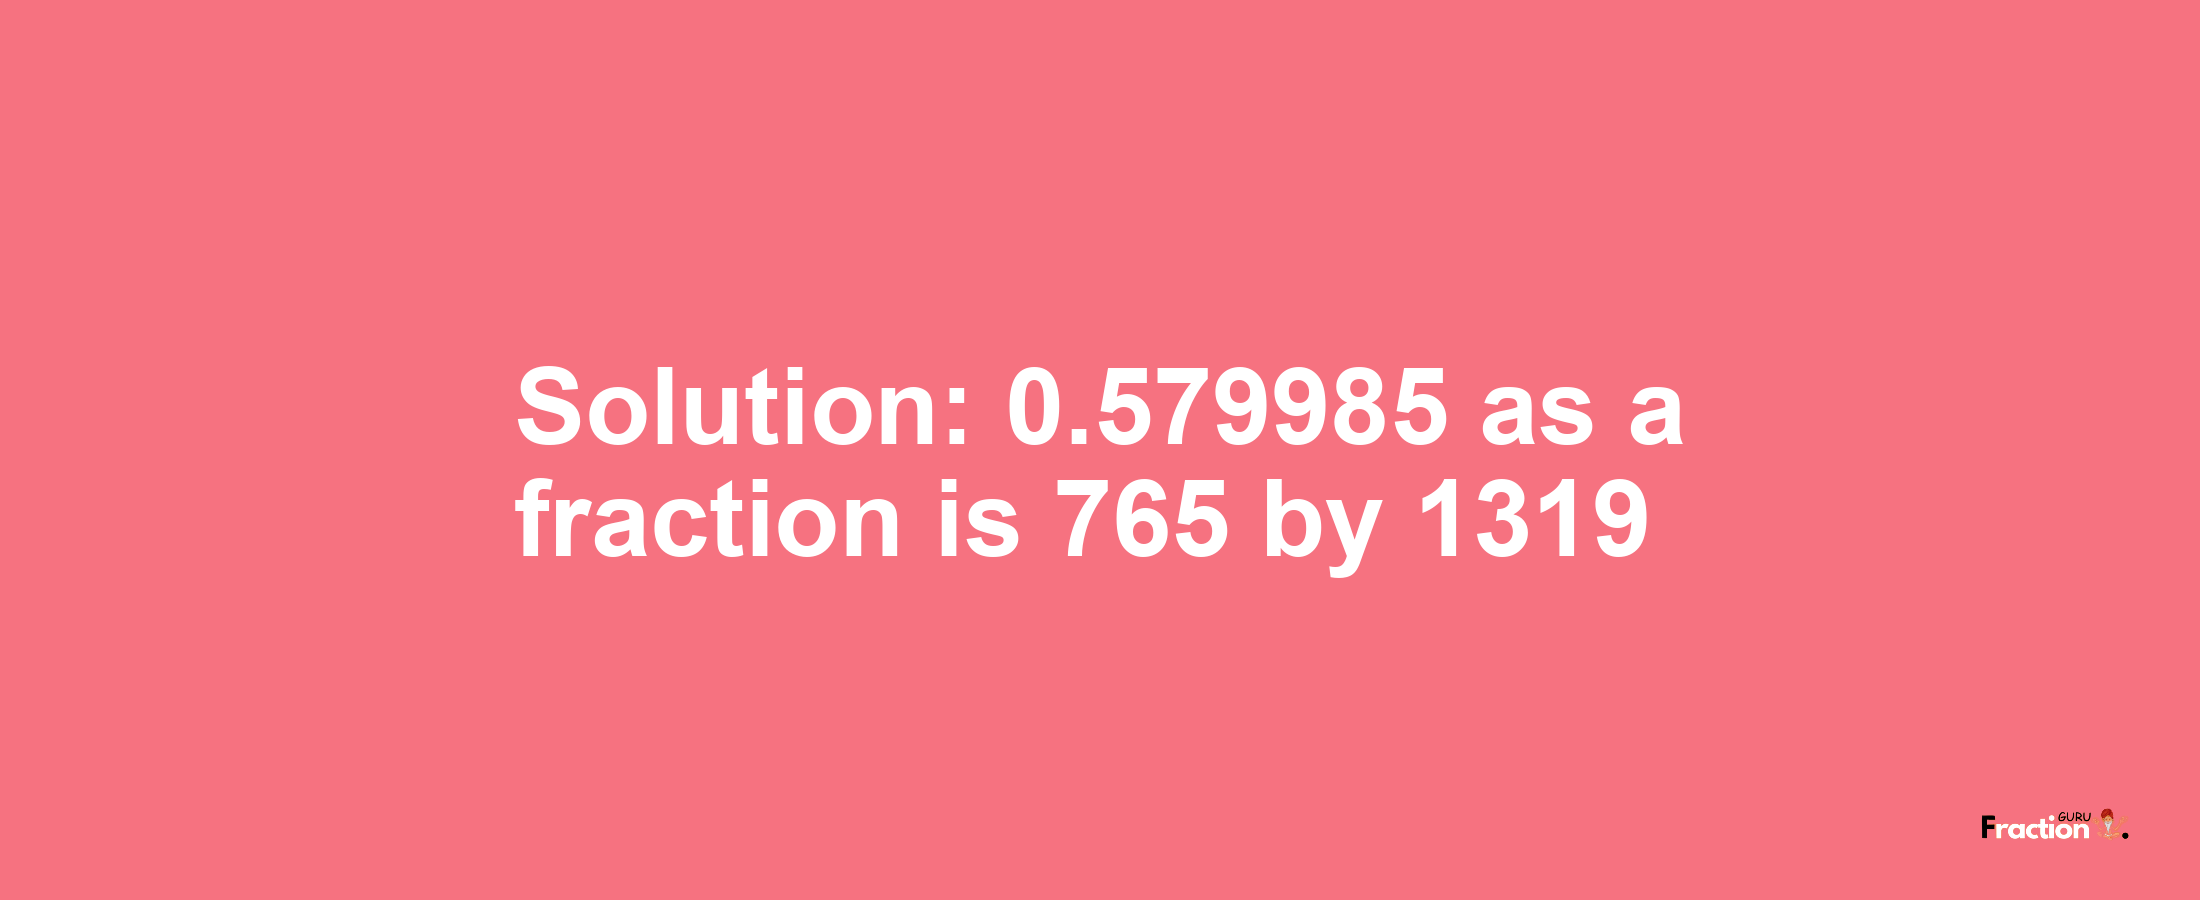 Solution:0.579985 as a fraction is 765/1319